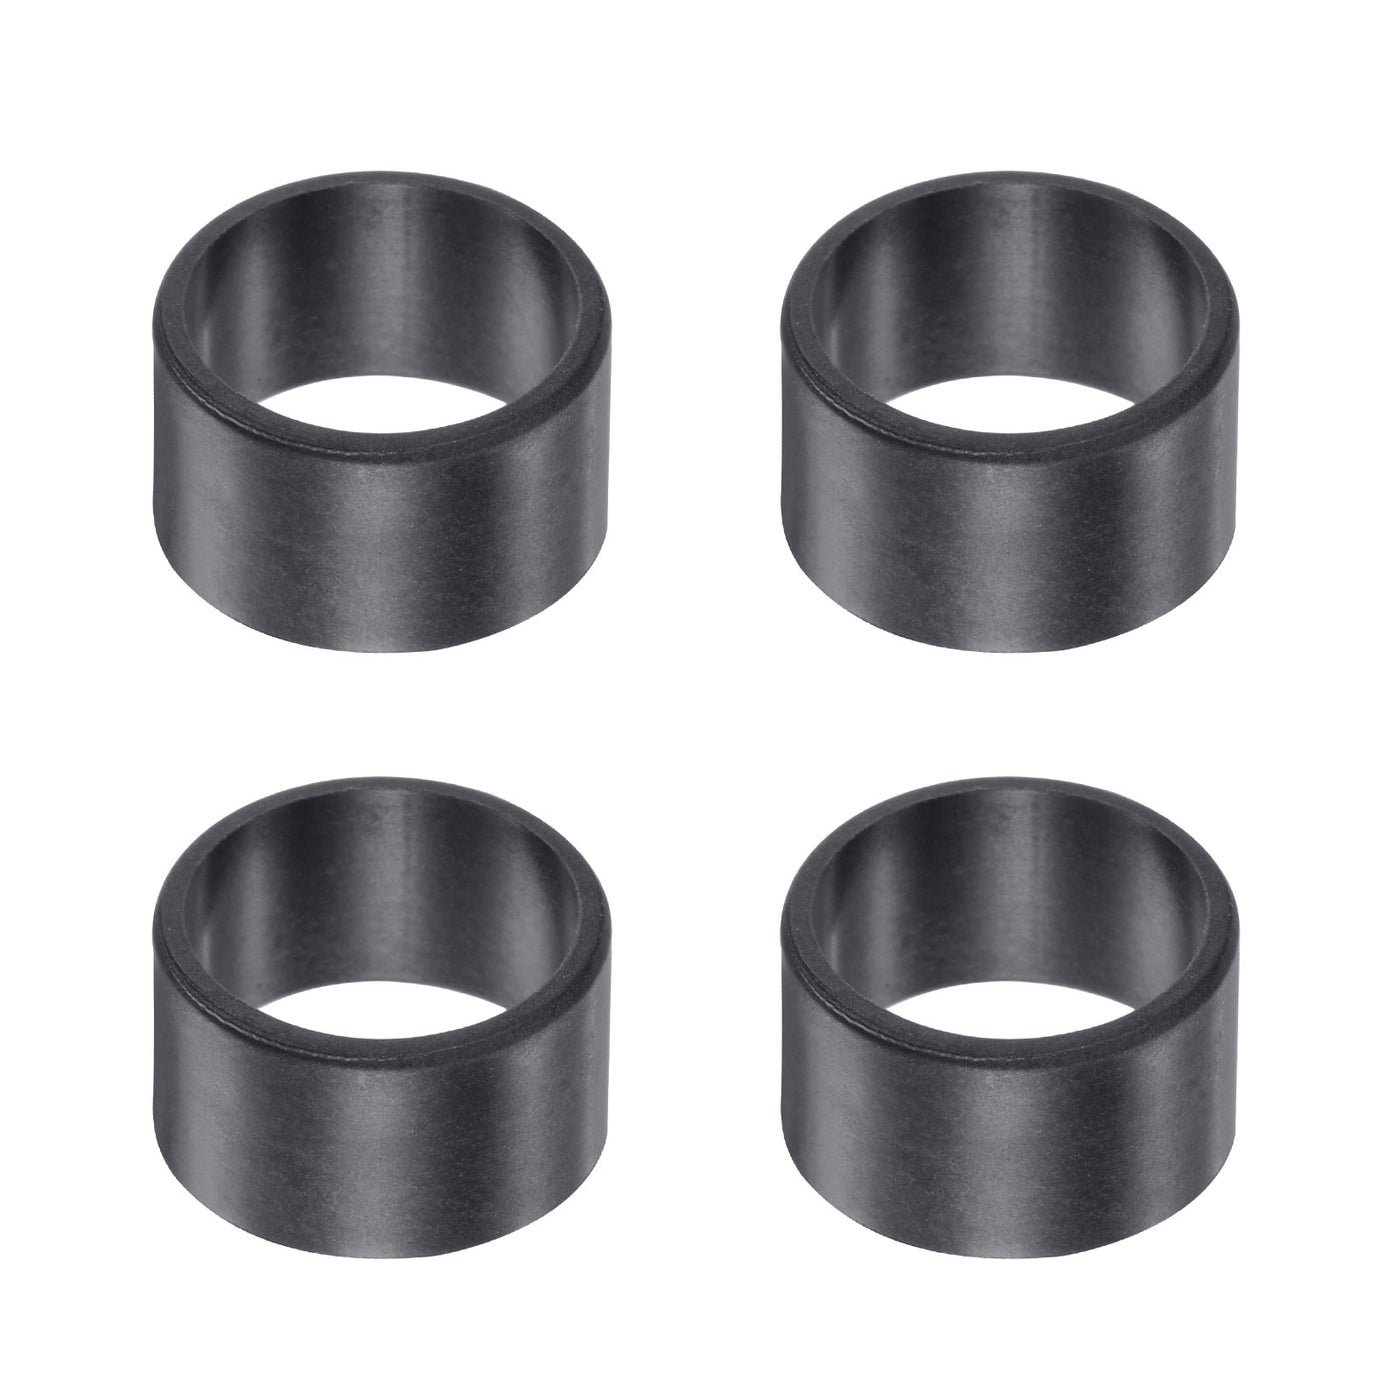 uxcell Uxcell Sleeve Bearings 12mmx14mmx8mm POM Wrapped Oilless Bushings Black 4pcs